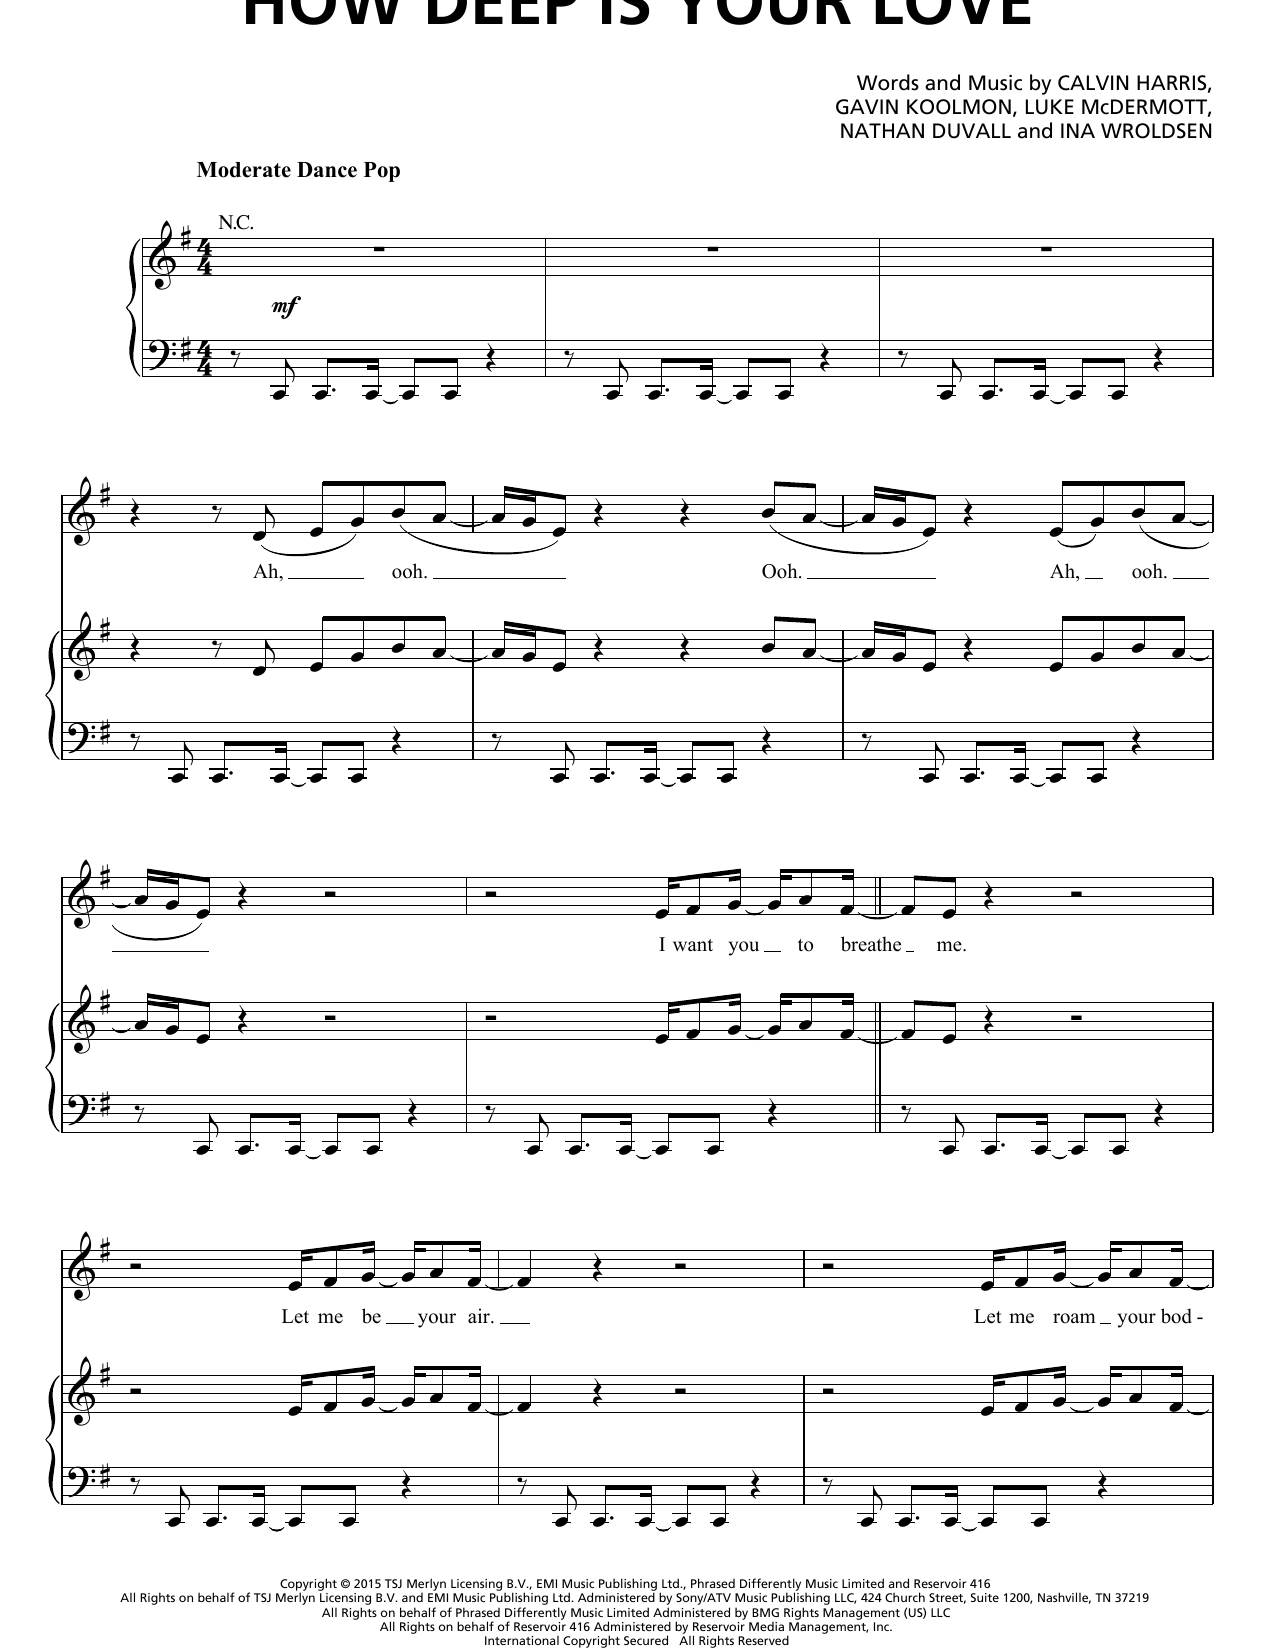 Download Calvin Harris and Disciples How Deep Is Your Love Sheet Music